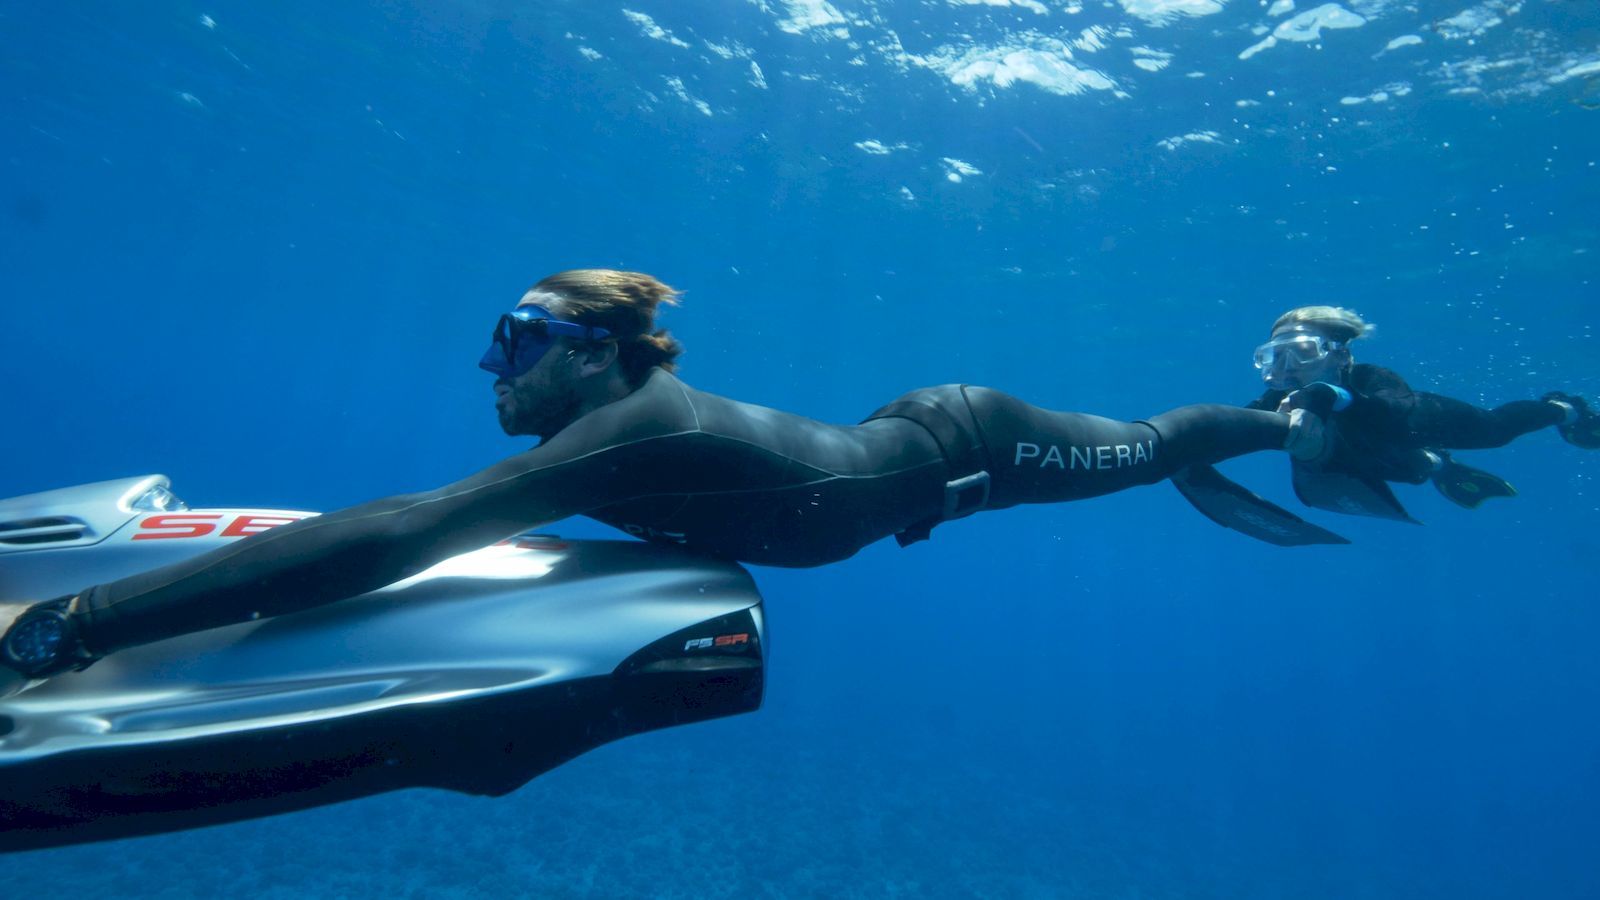 Panerai and freediving champ Guillaume Néry take the concept of luxury experiences to new depths